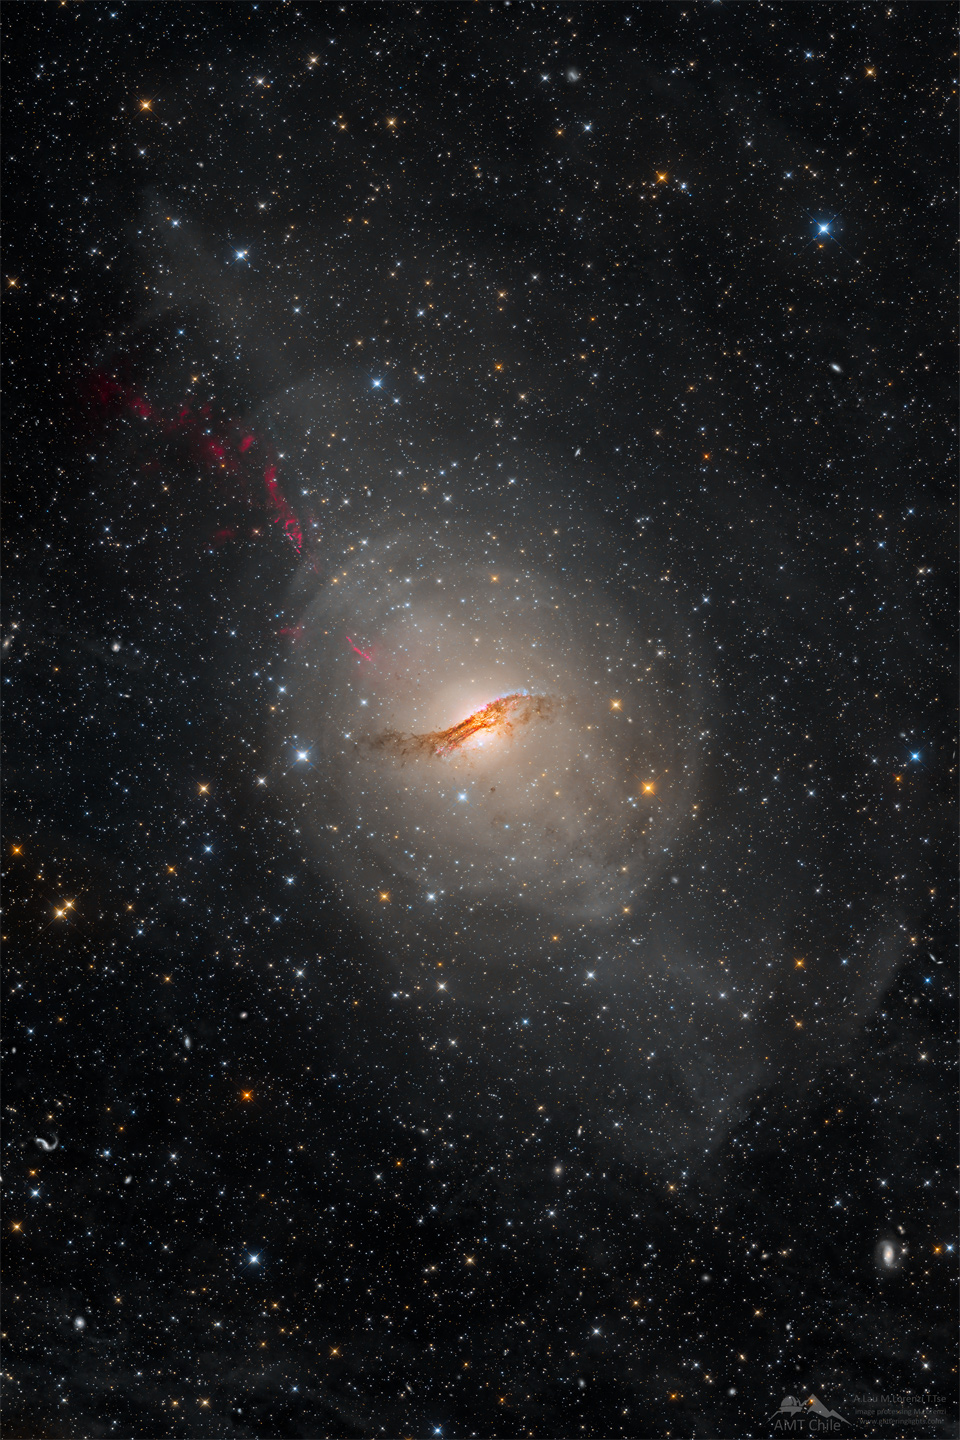 A long duration image of the unusual galaxy Centaurus A.
The galaxy appears as a light oval with a complex dark dust
lane running across its center. A starfield surrounds the galaxy.
Please see the explanation for more detailed information.